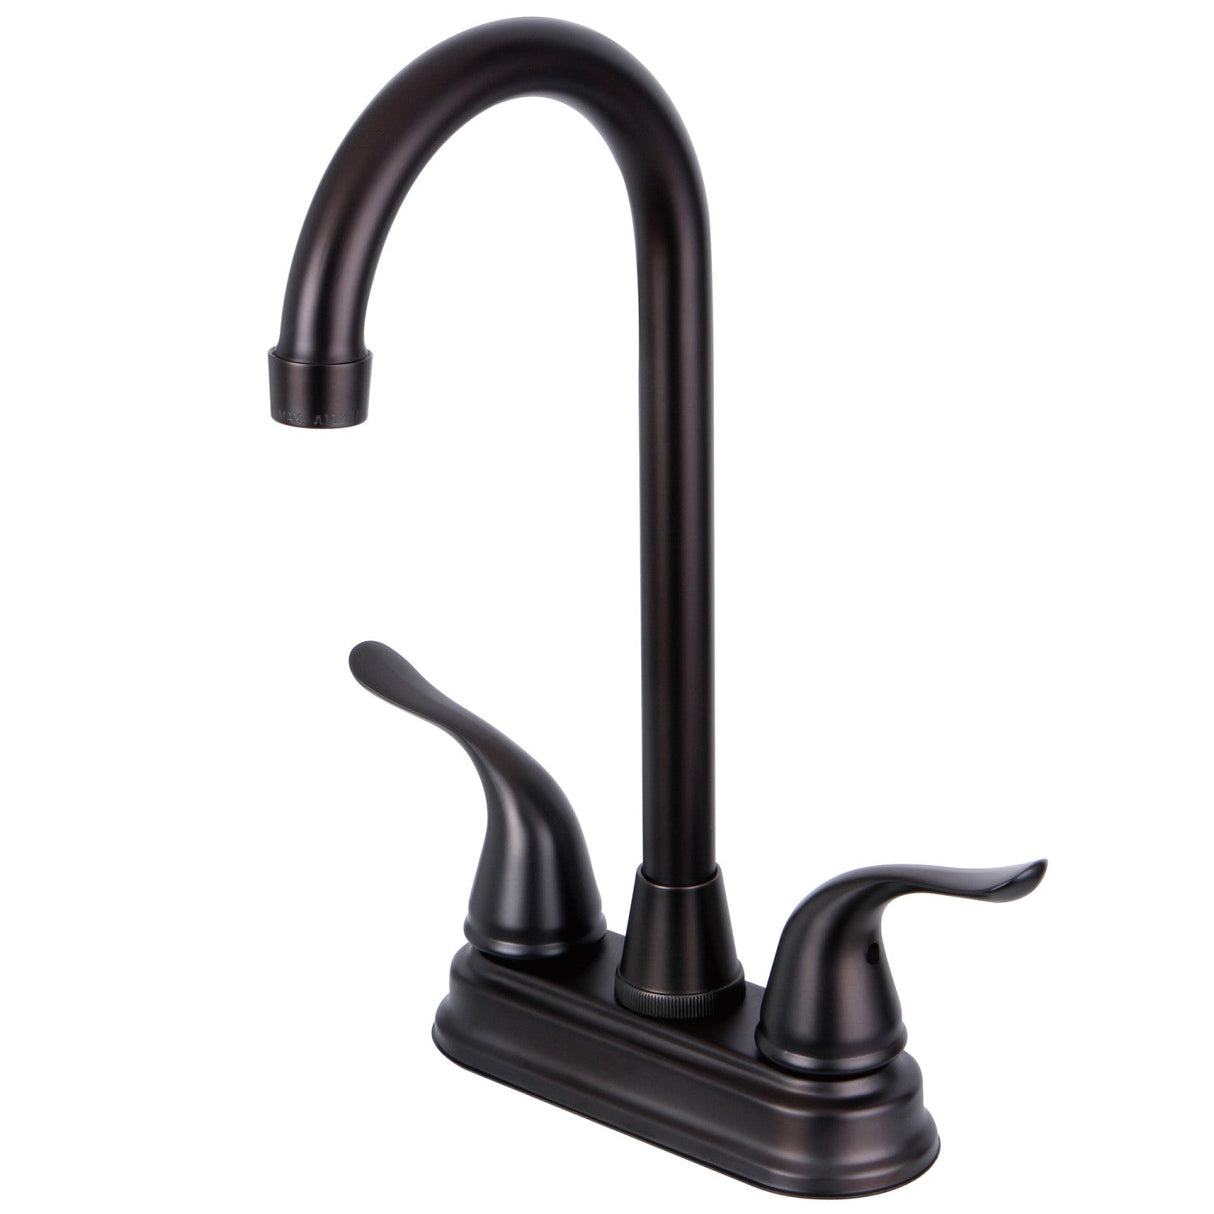 Yosemite KB2495YL Two-Handle 2-Hole Deck Mount Bar Faucet, Oil Rubbed Bronze